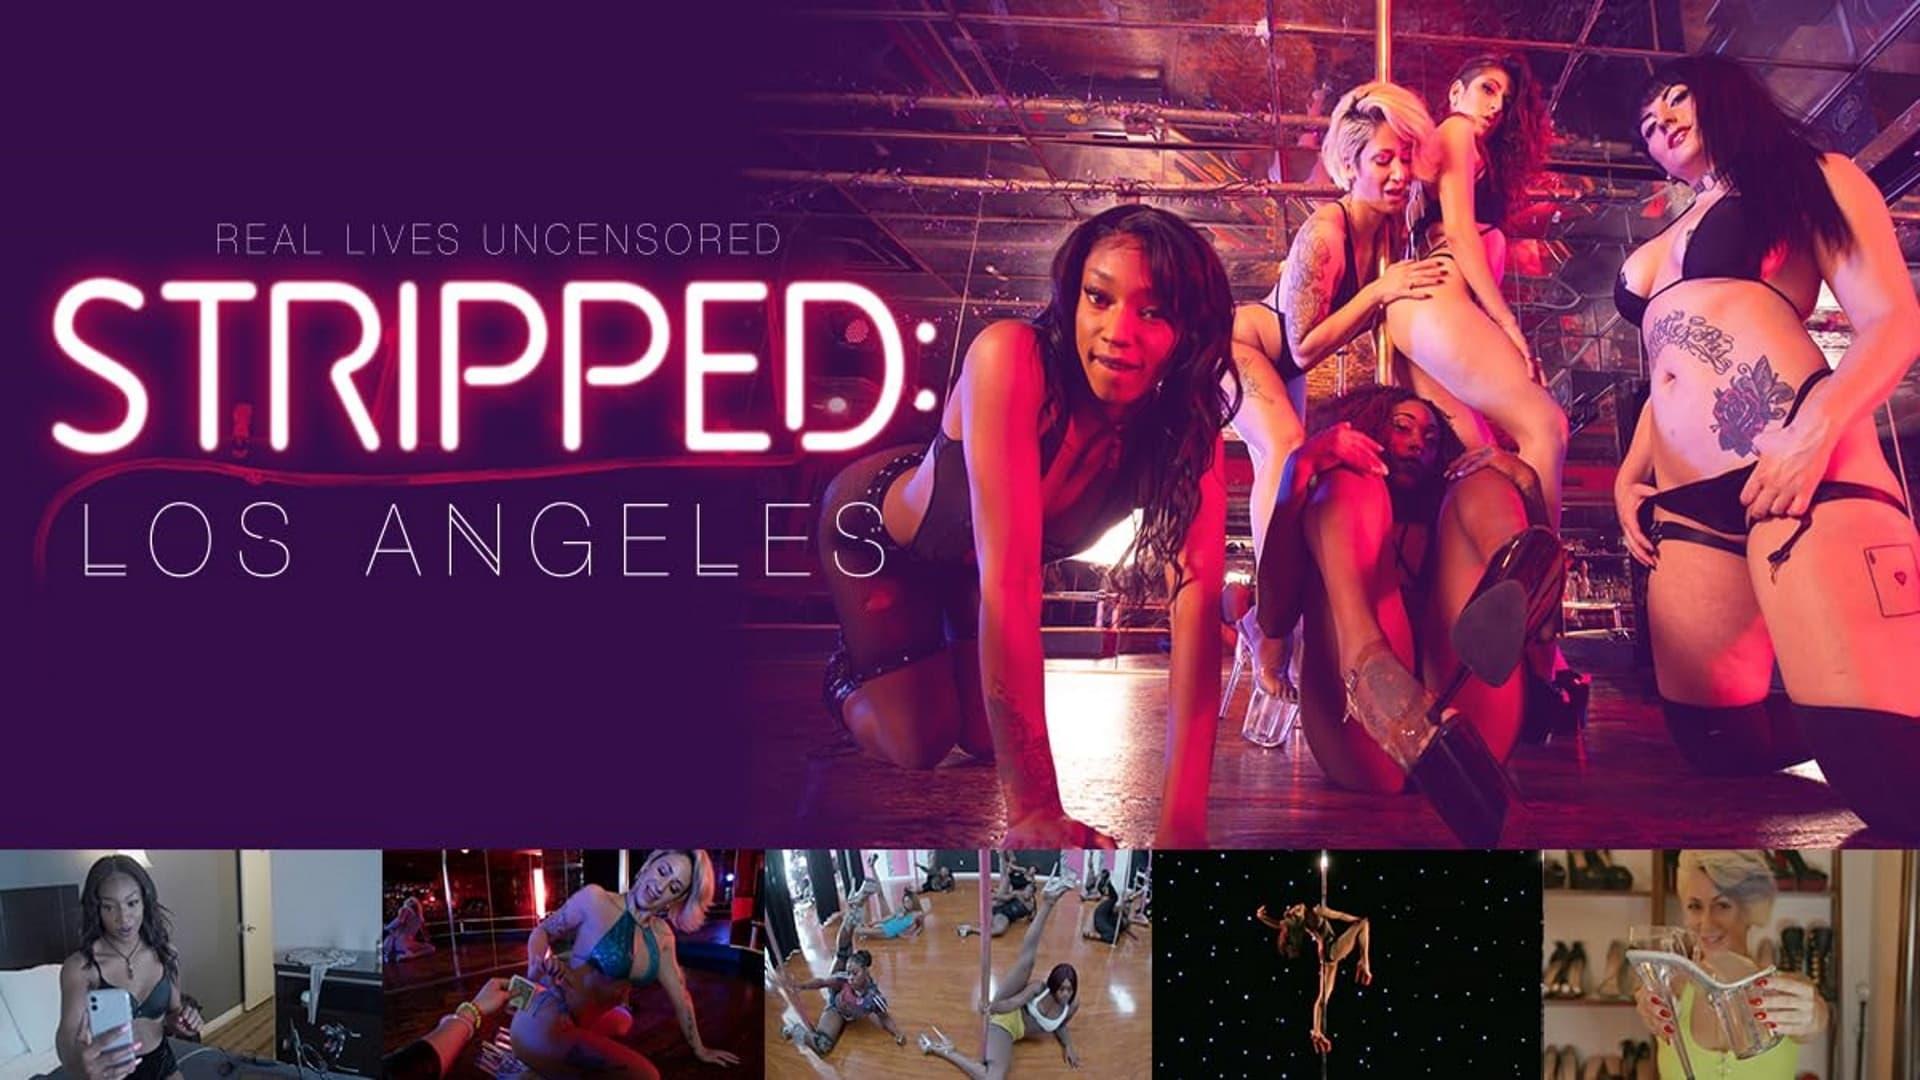 Stripped: Los Angeles backdrop